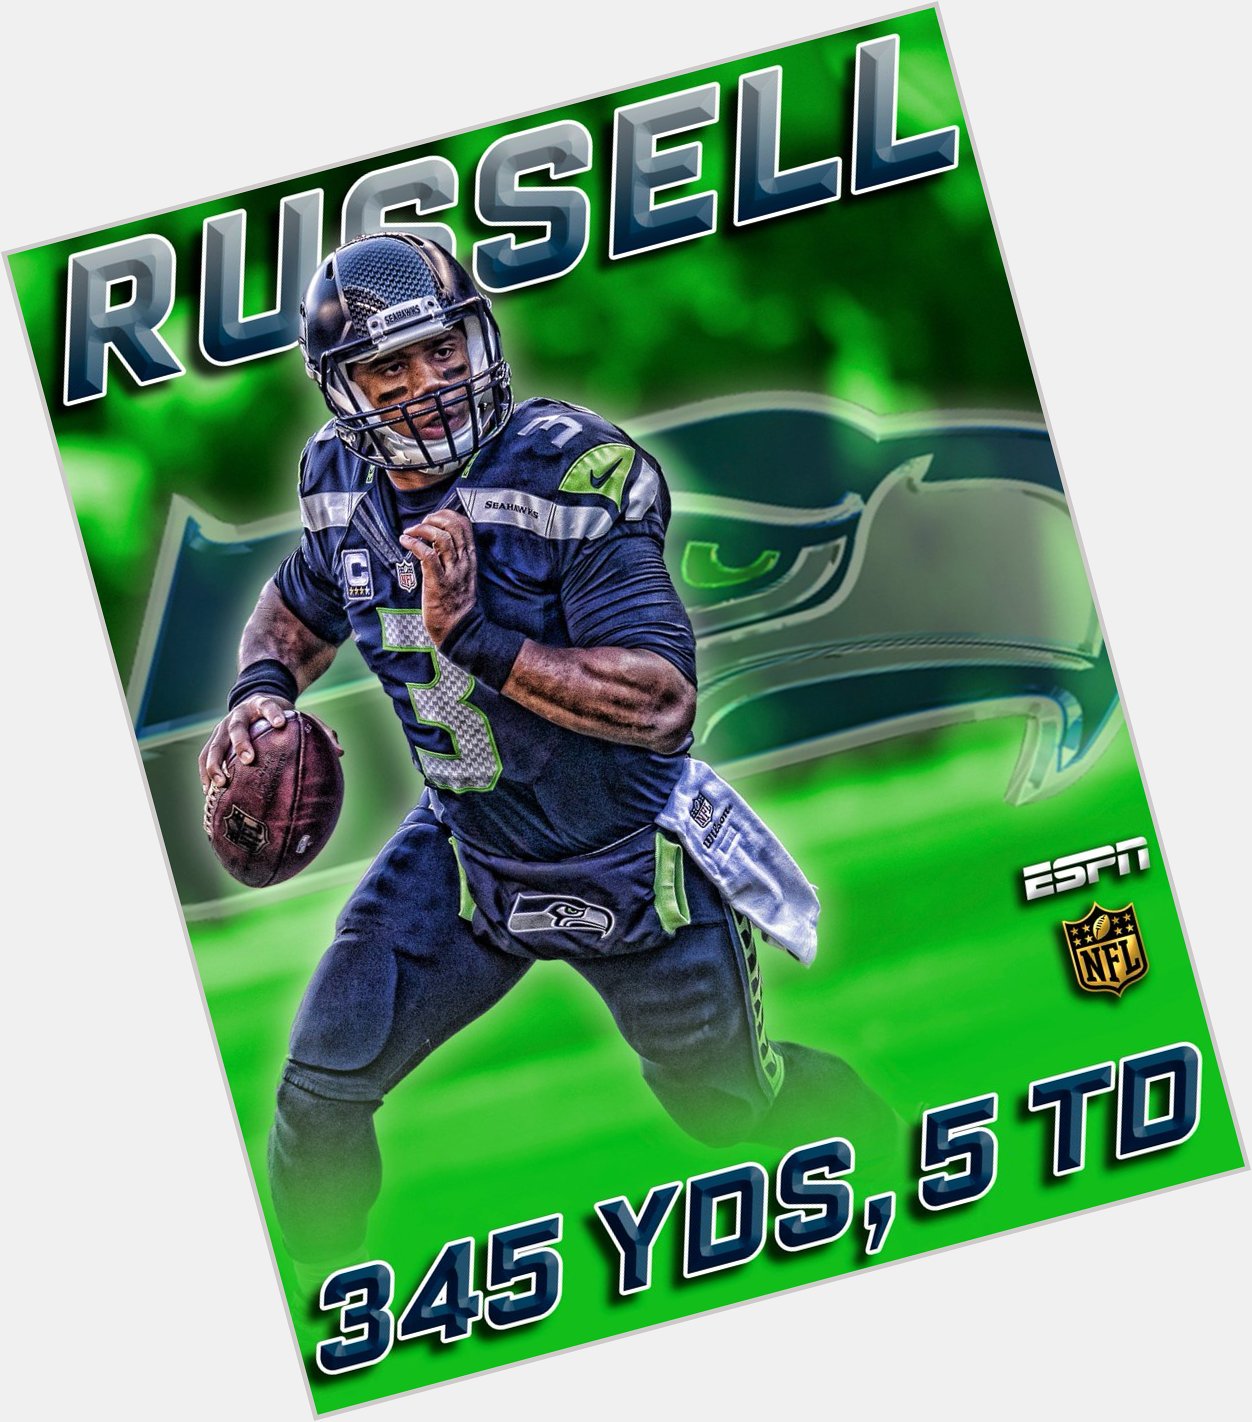 Happy birthday to Russell Wilson. He celebrates with career highs in both passing yards & passing TD in a game.   